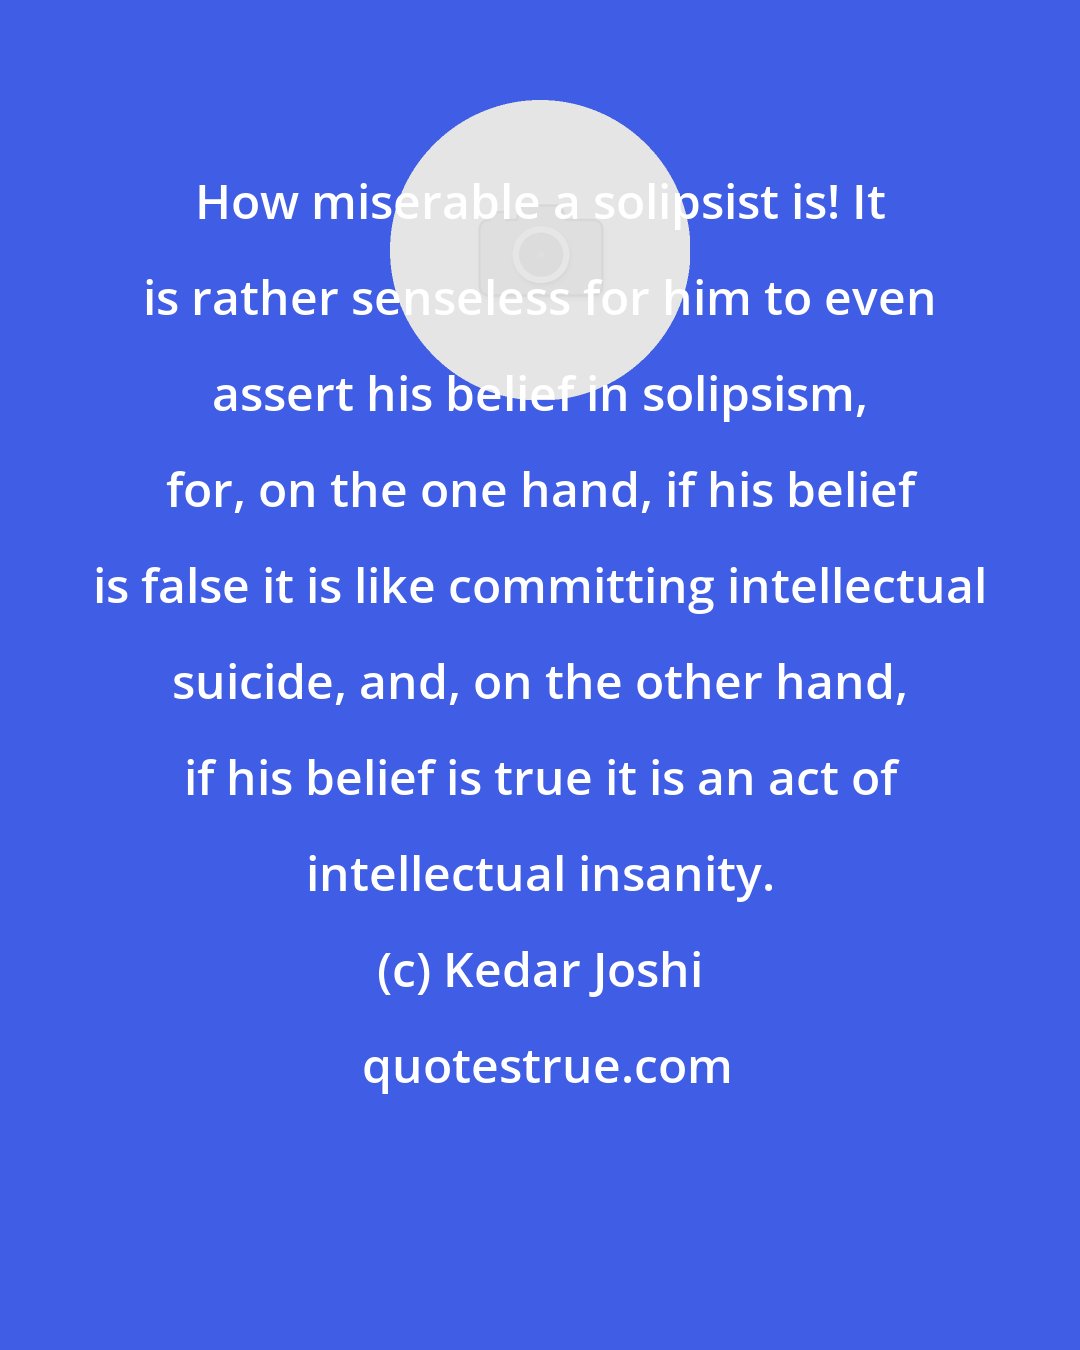 Kedar Joshi: How miserable a solipsist is! It is rather senseless for him to even assert his belief in solipsism, for, on the one hand, if his belief is false it is like committing intellectual suicide, and, on the other hand, if his belief is true it is an act of intellectual insanity.